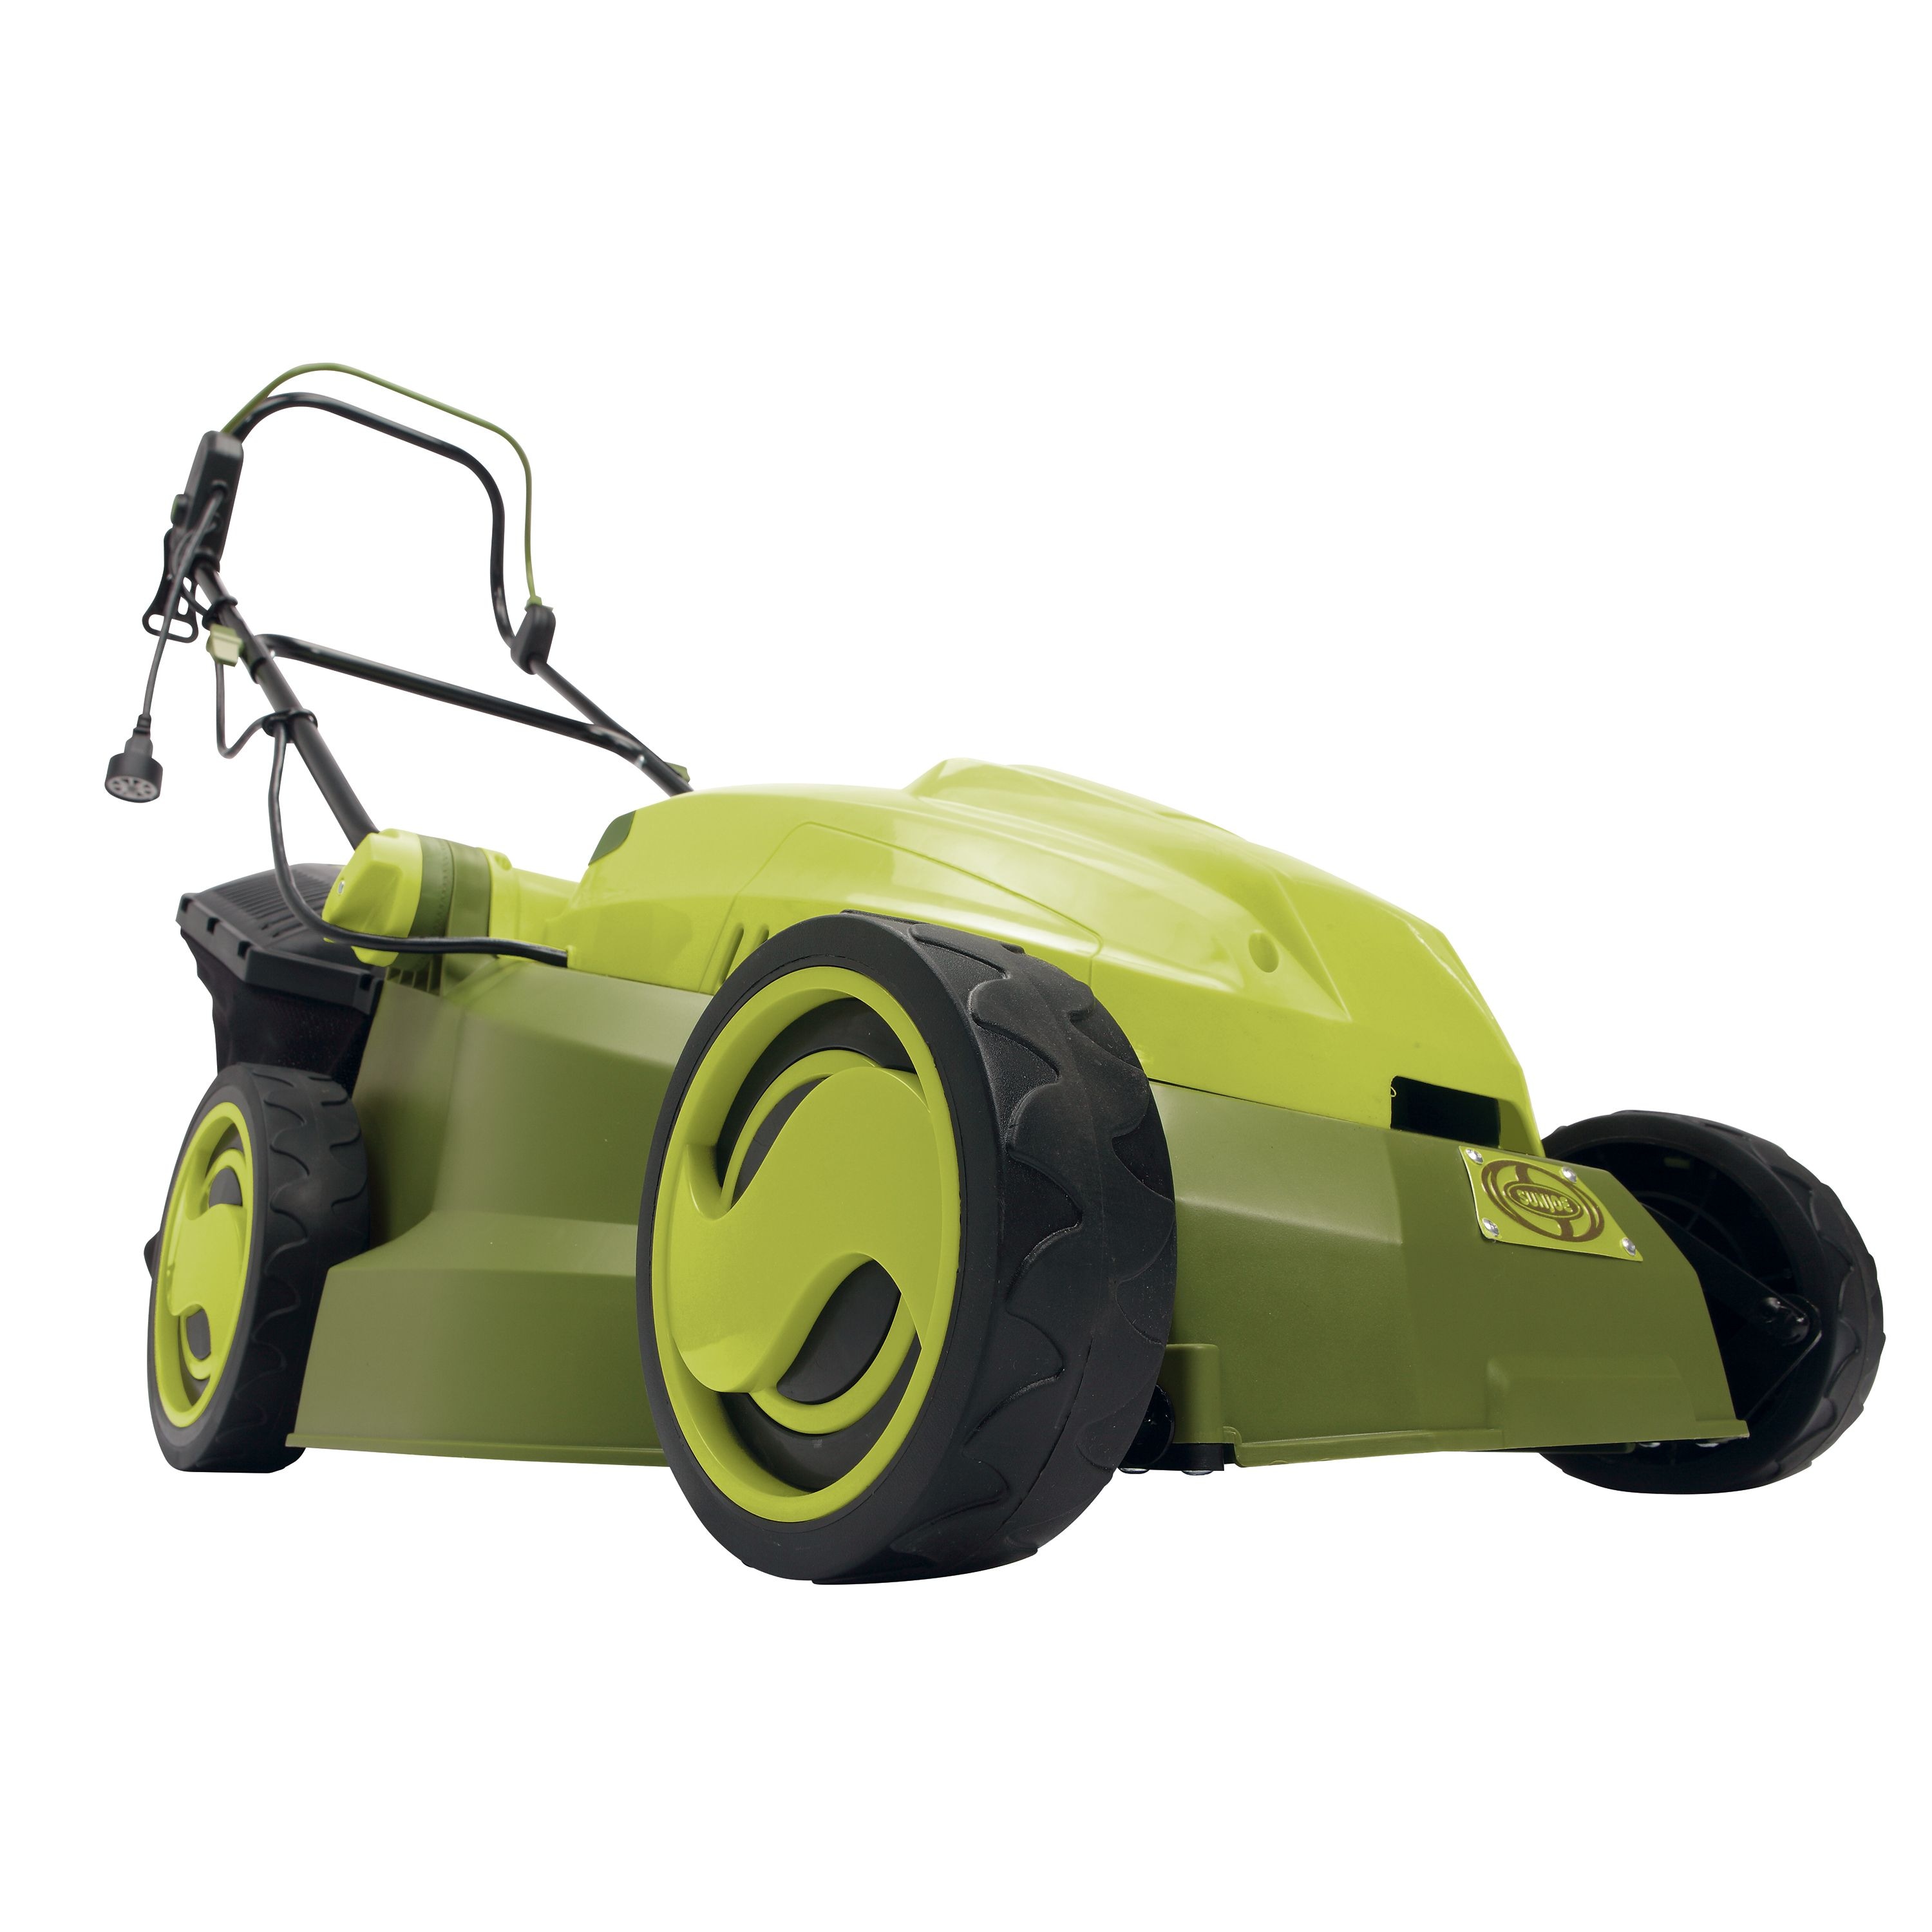 Sun Joe 16 in. 12 Amp Corded Electric Walk Behind Push Mower with Mulcher  MJ402E - The Home Depot